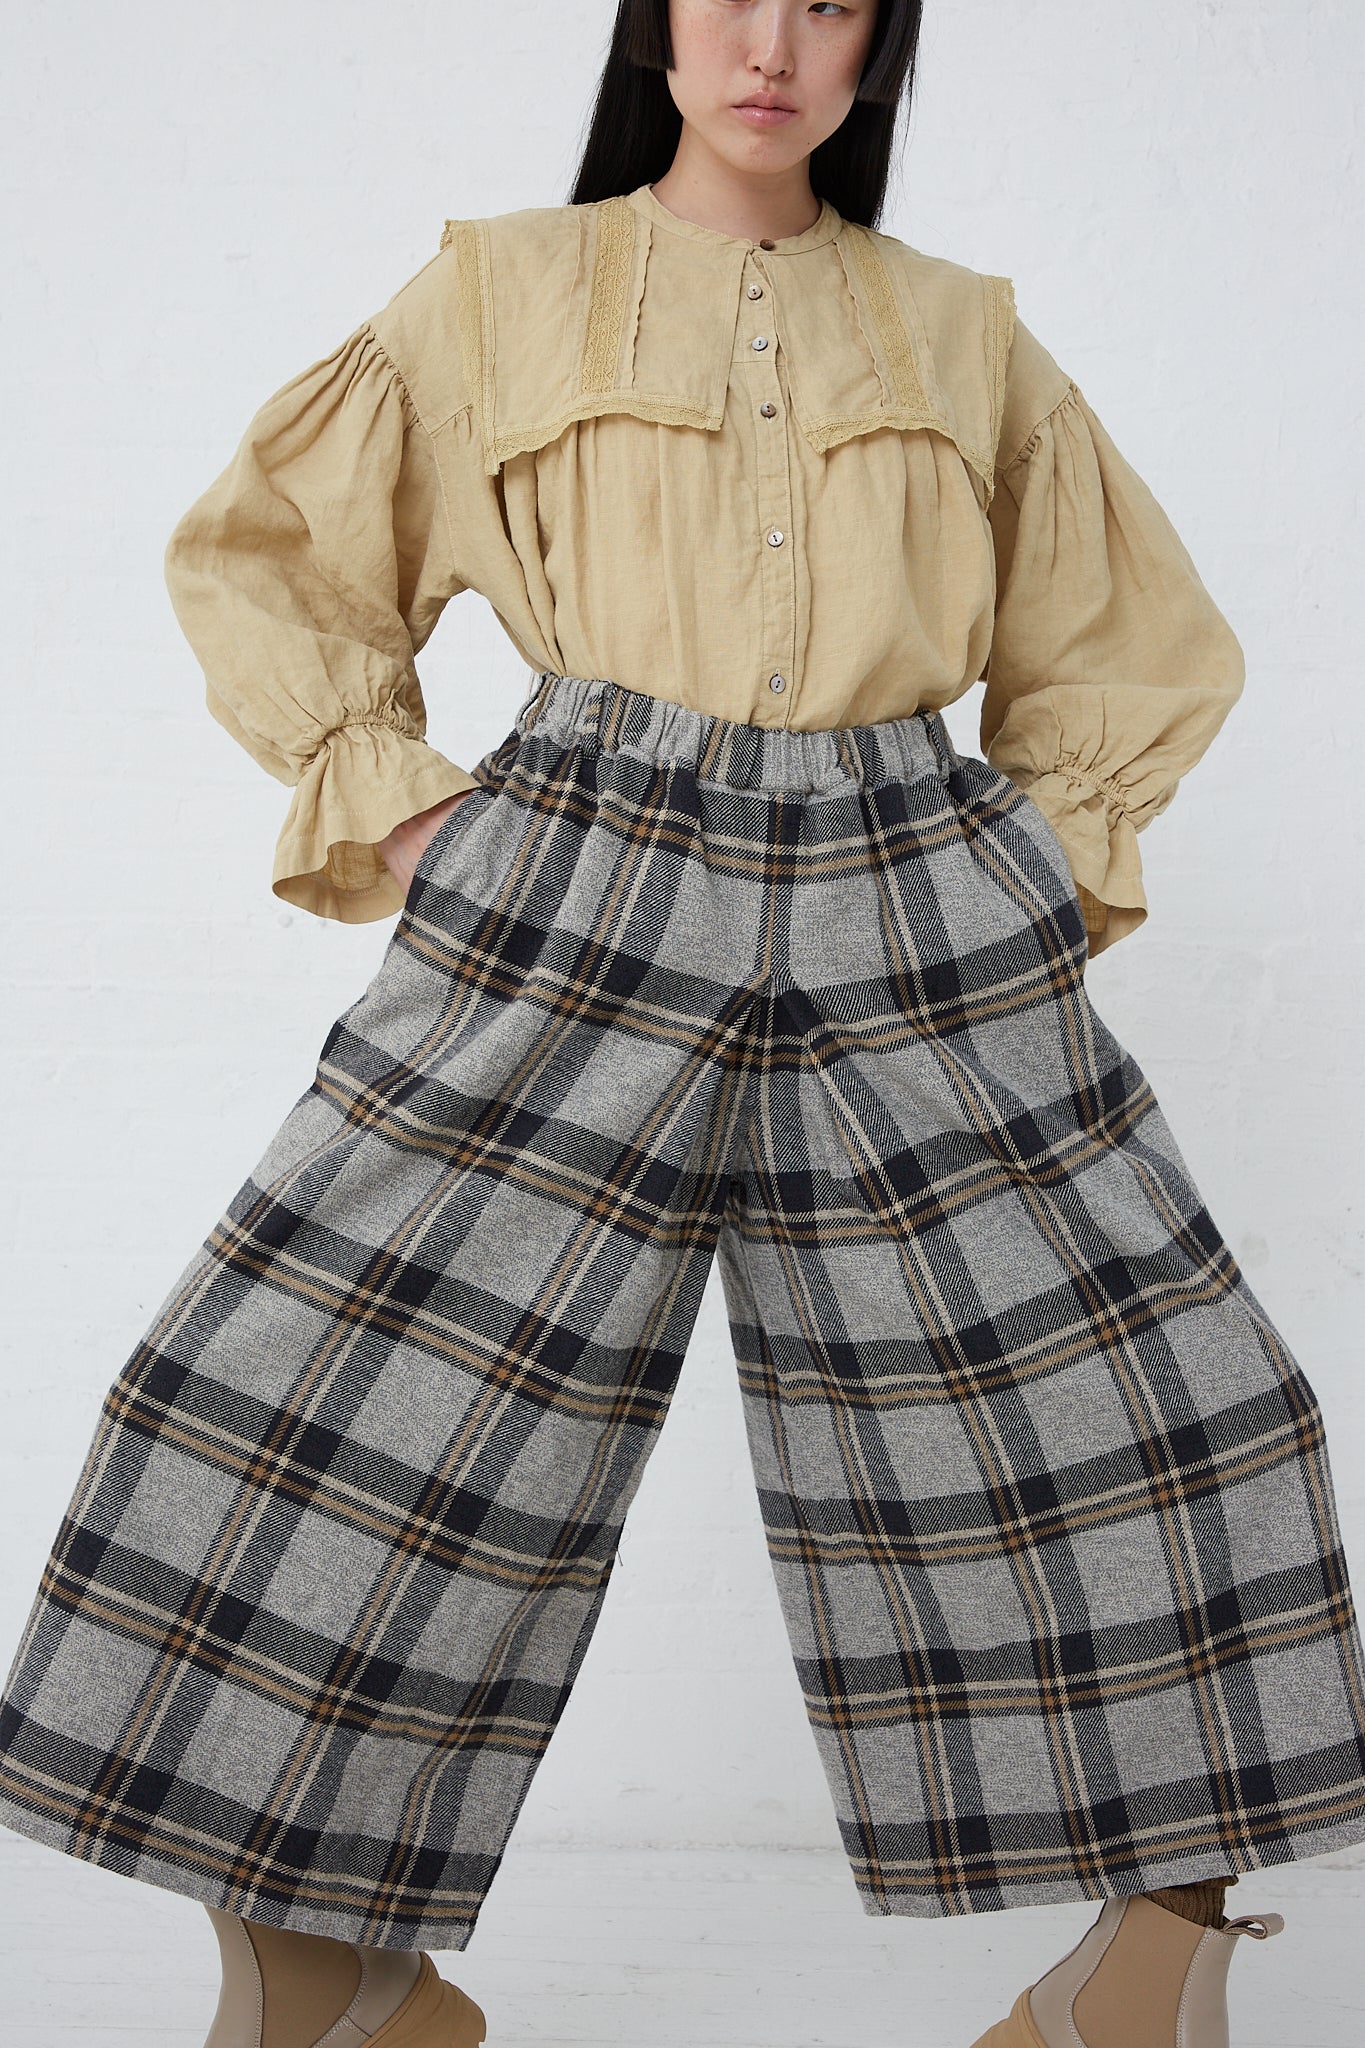 A woman wearing a yellow blouse and a pair of nest Robe's Cotton Heavy Twill Plaid Wide Leg Pant in Navy made of cotton twill.